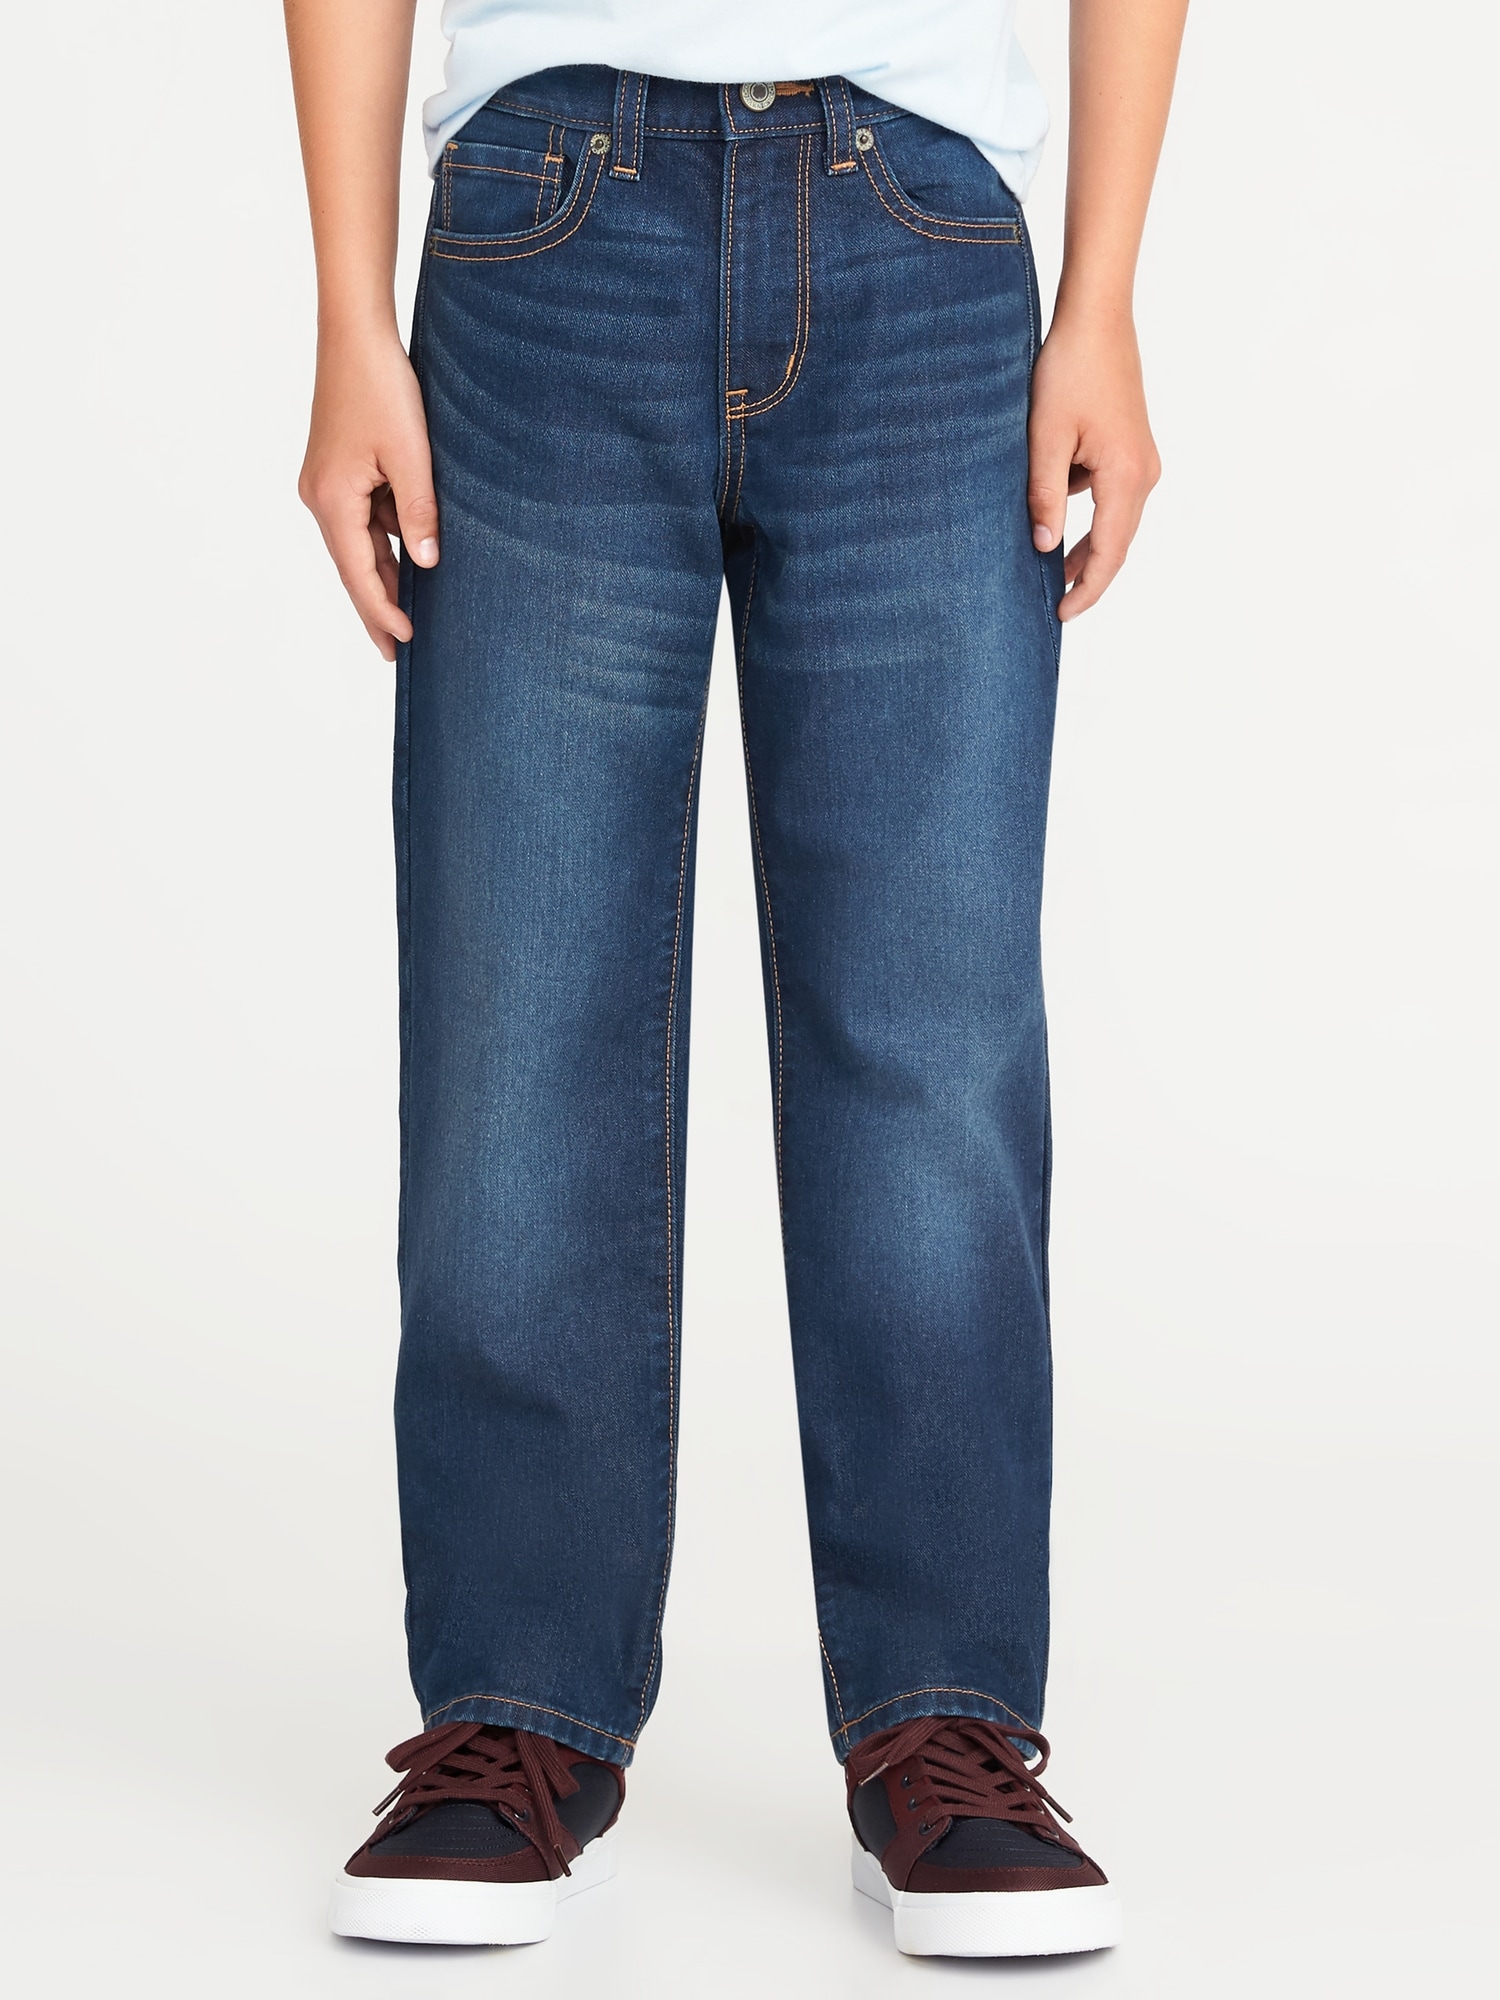 Straight Non-Stretch Jeans for Boys